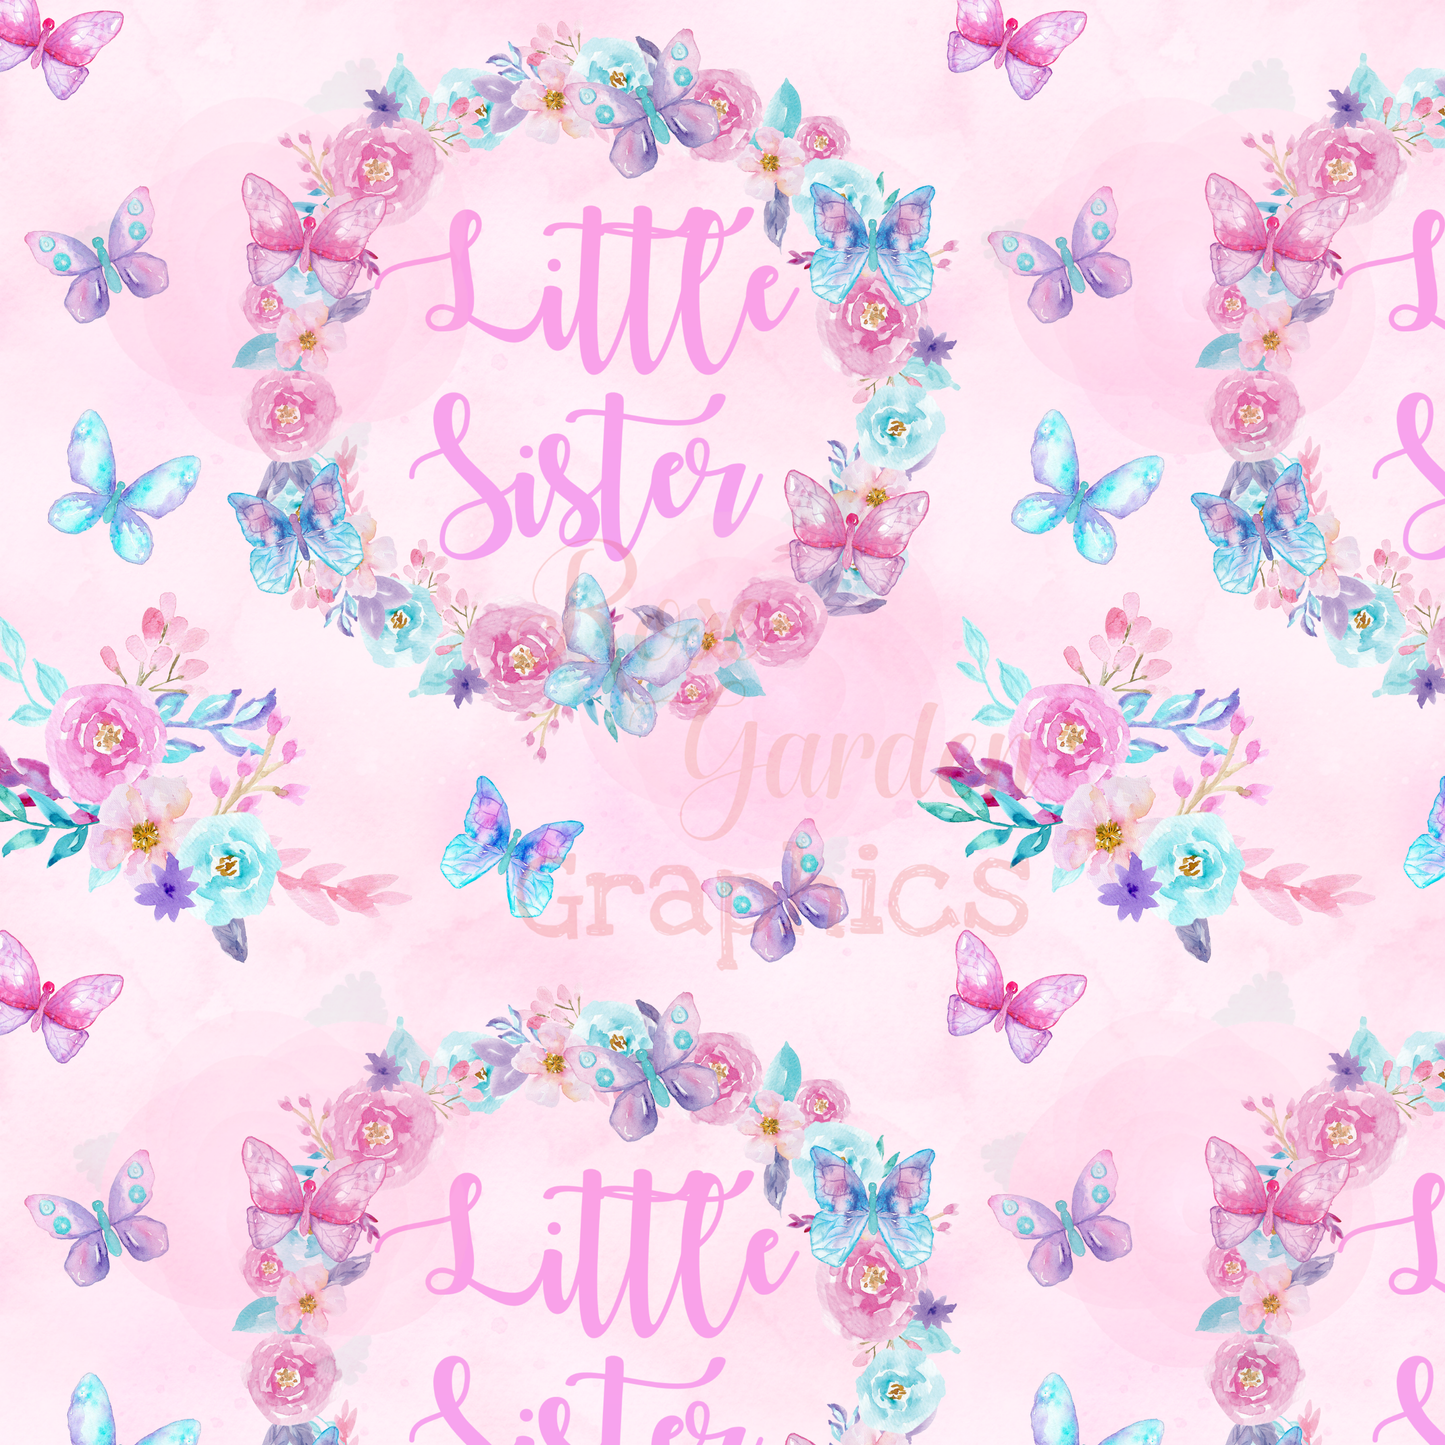 Butterflies Watercolor Big Sister/Little Sister Seamless Images